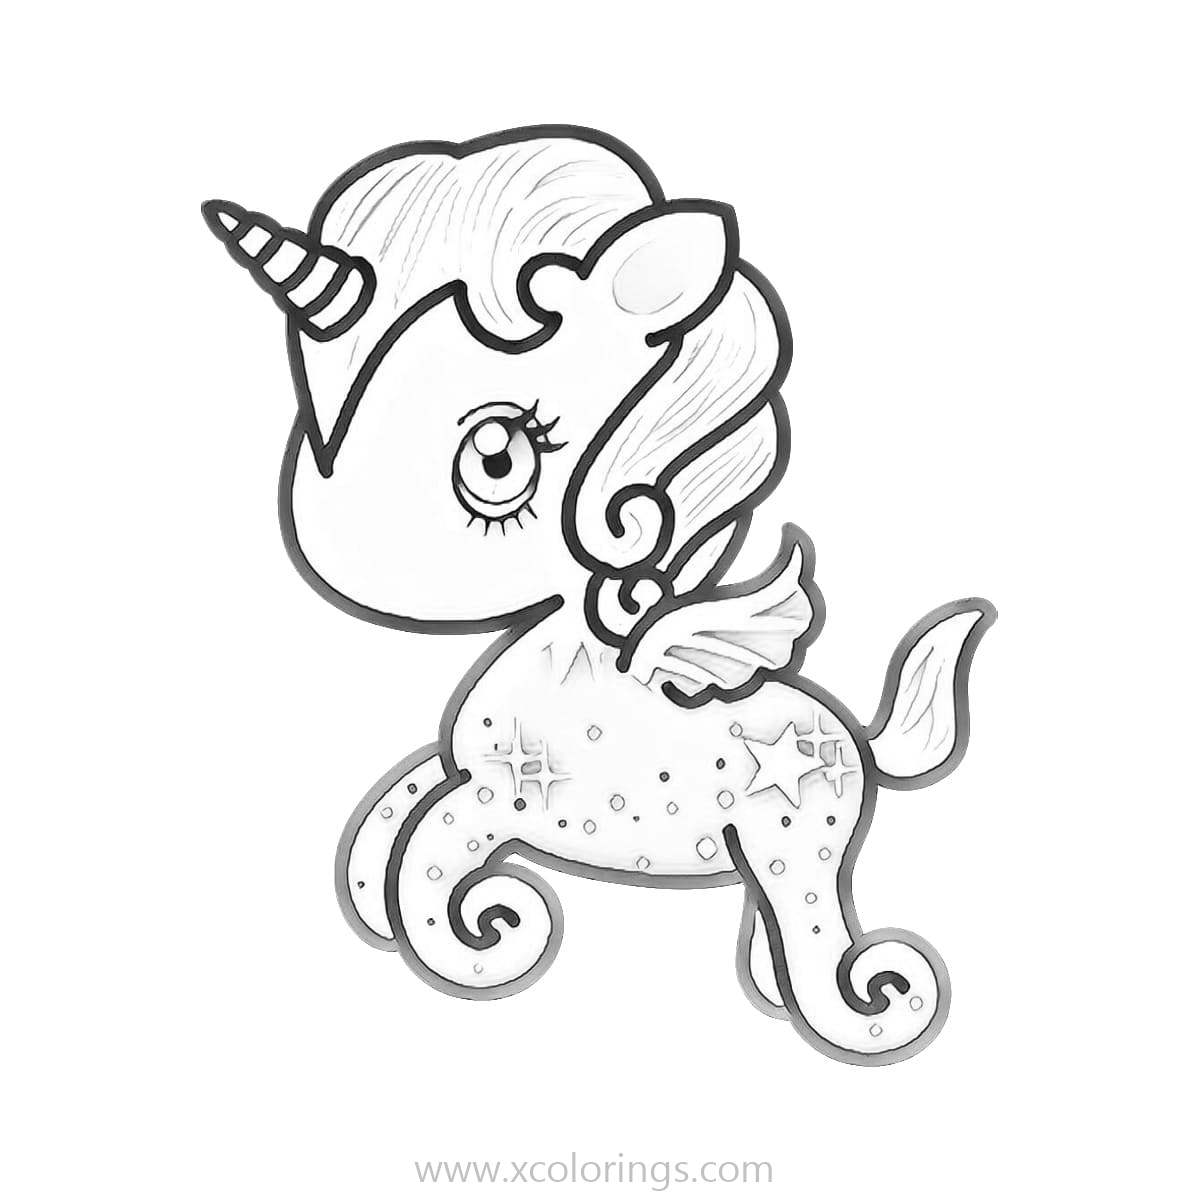 Free Tokidoki Coloring Pages Unicorn Bowie printable